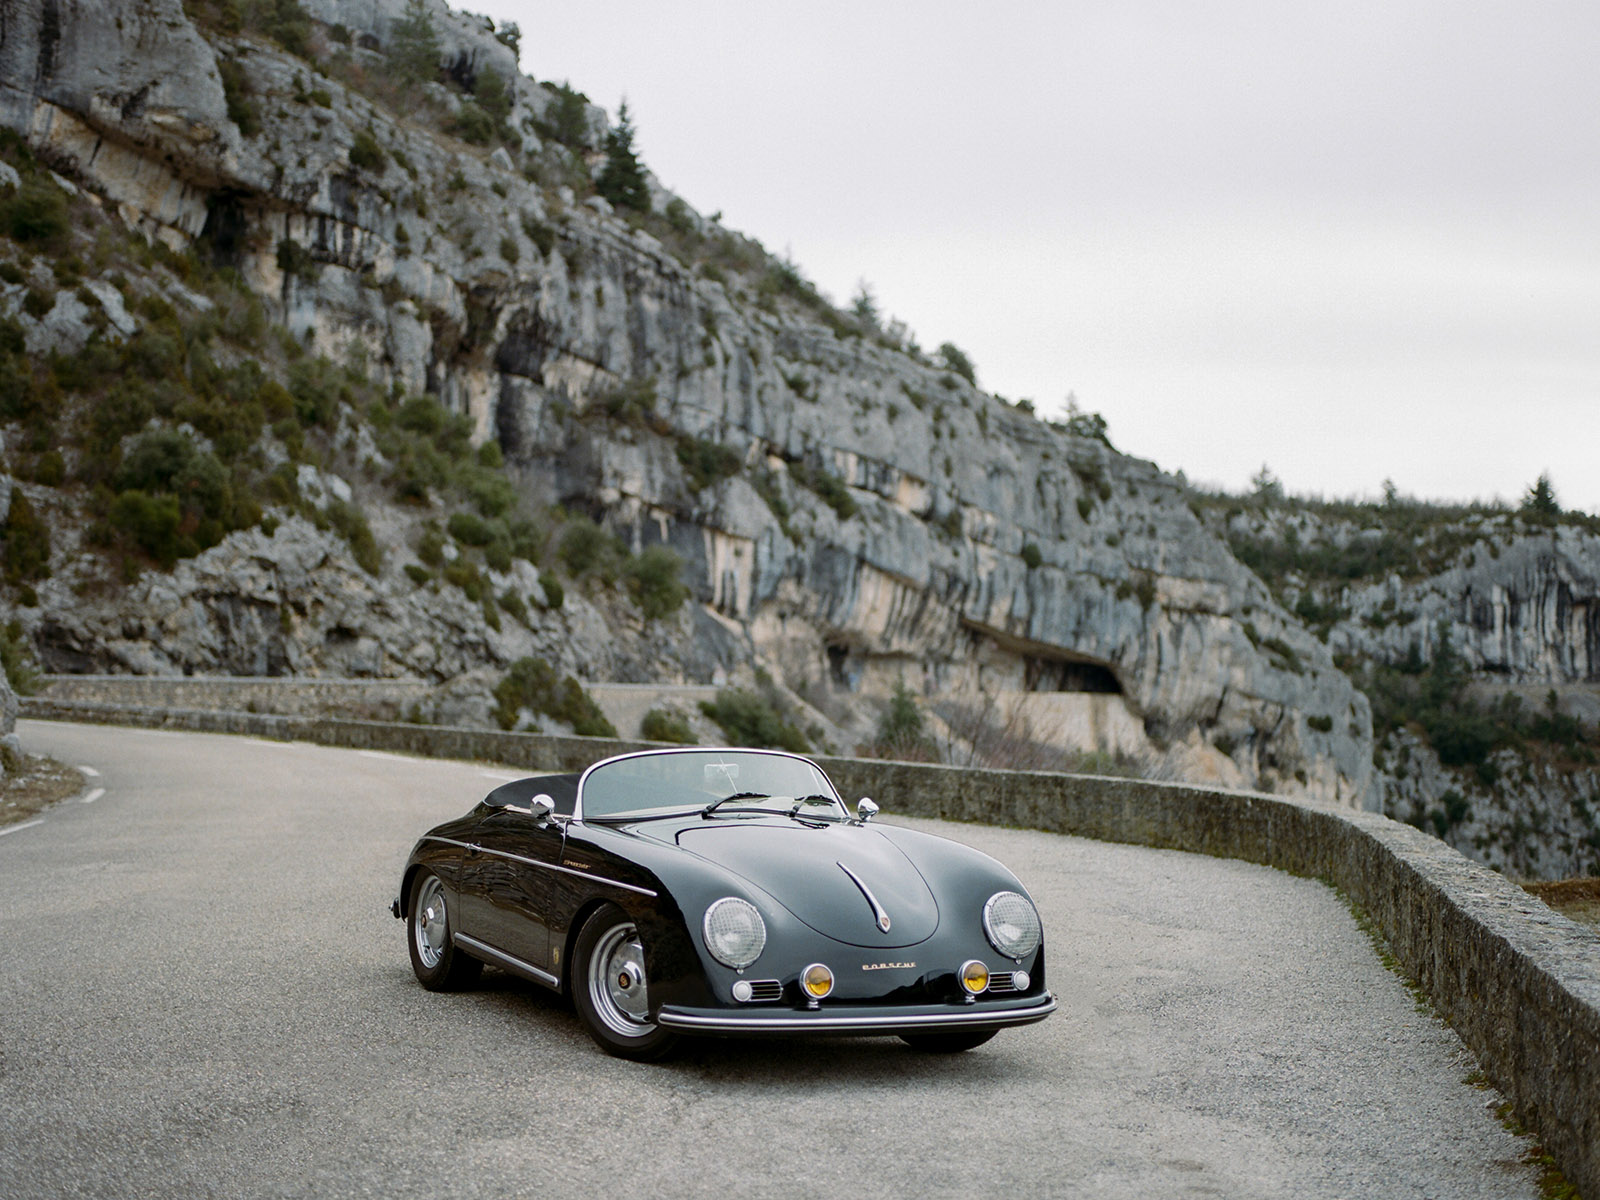 A front view of the Provence Classics Porsche 356 in the countryside of Provence, France.